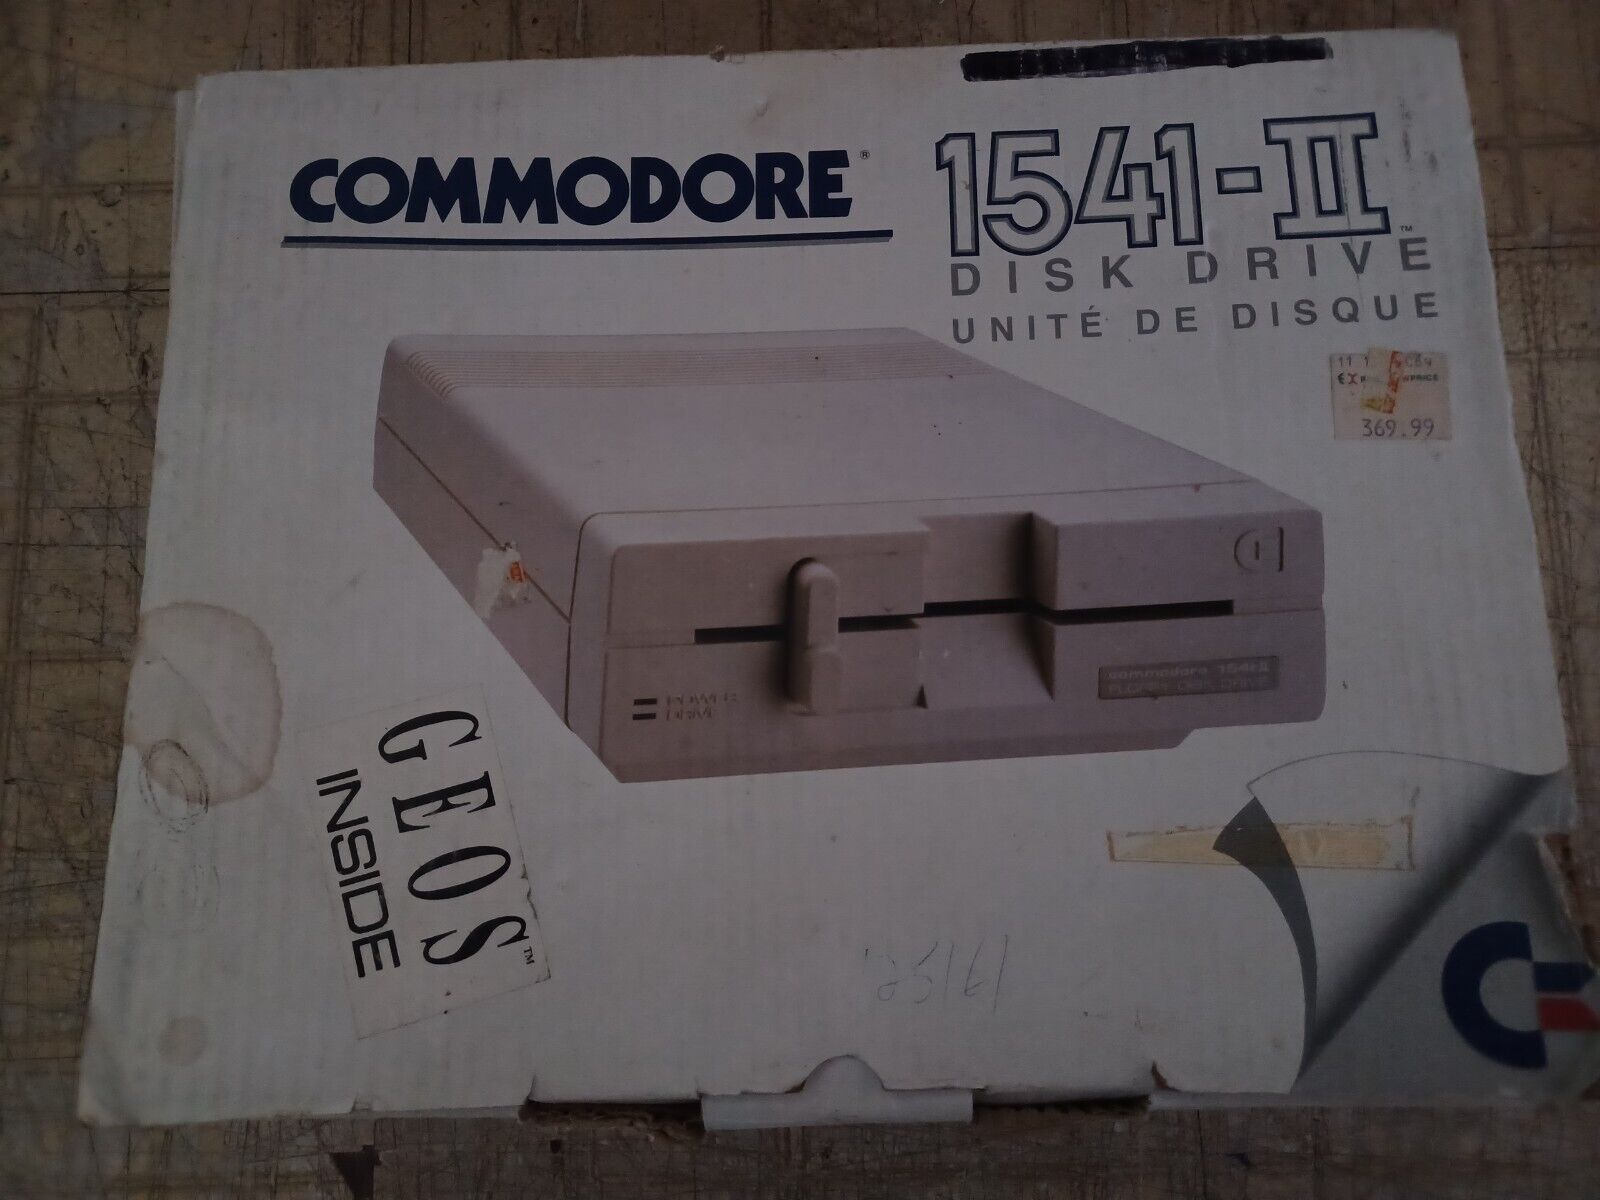 RARE Vintage Canadian Commodore 1541-II Floppy drive - tested working boxed